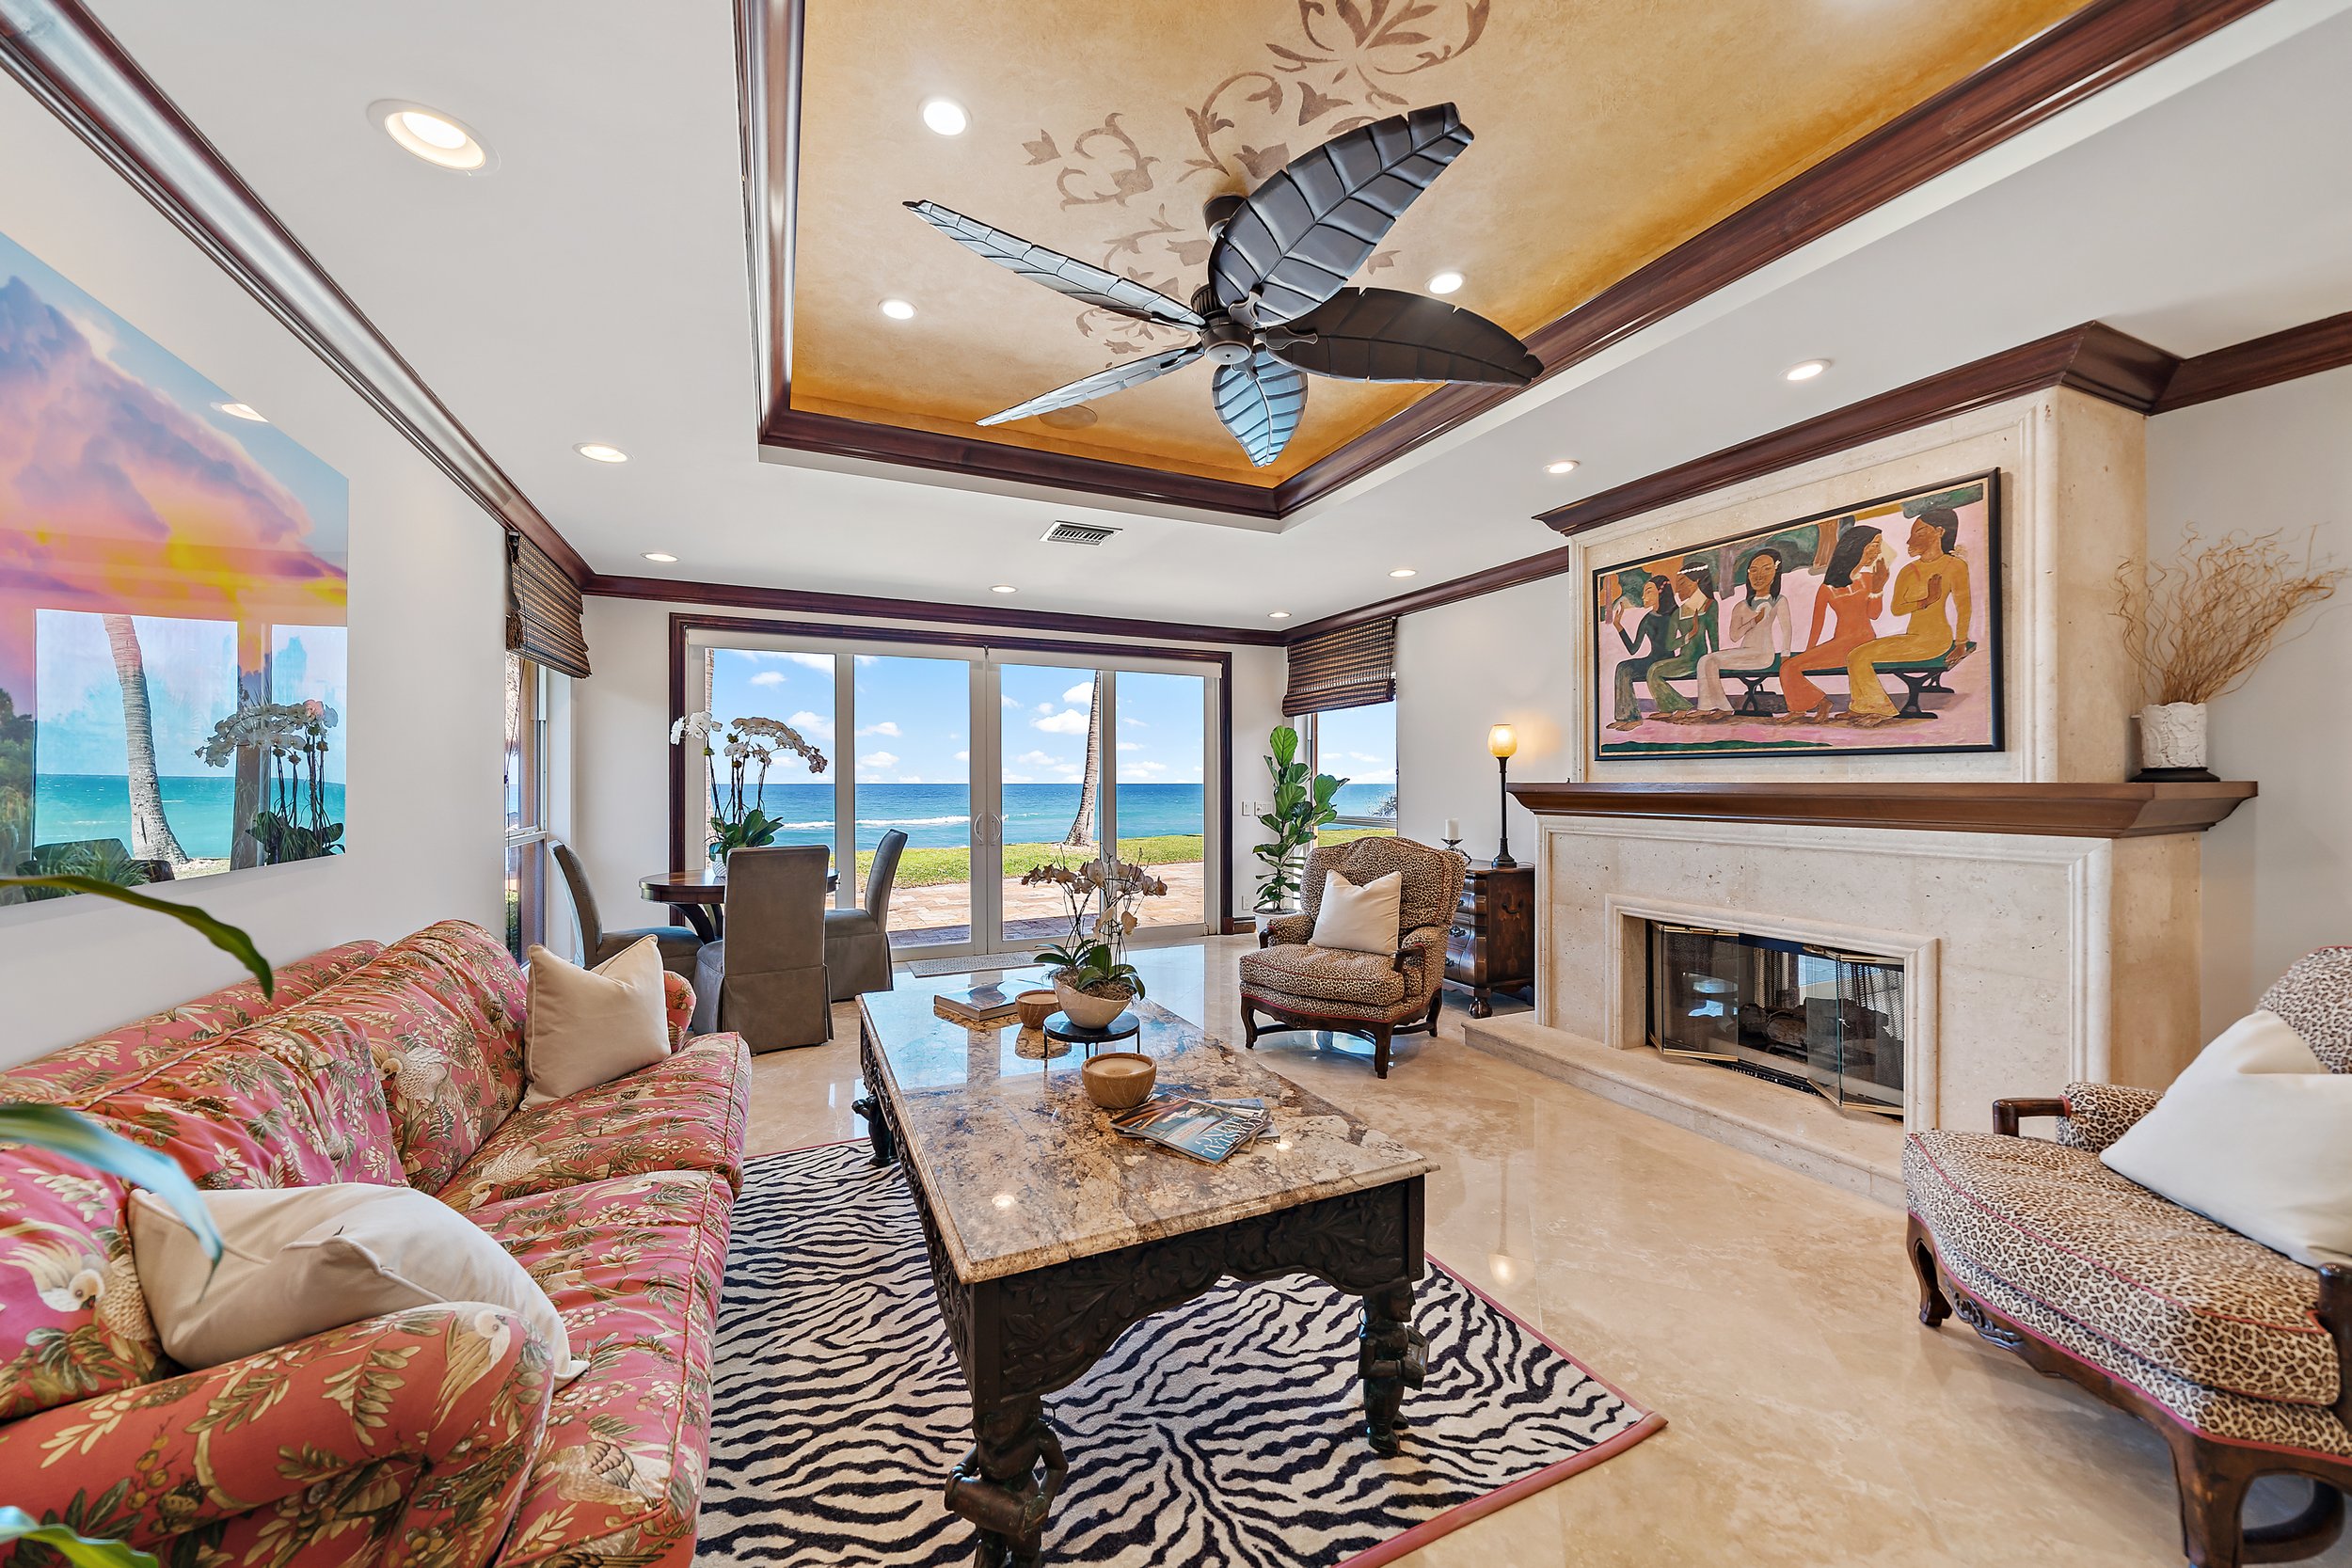 Tour A Jupiter Beachfront Mansion Owned By Clyde R. %22Buzz%22 Gibb Which Is Asking $24.9 Million 121.jpg